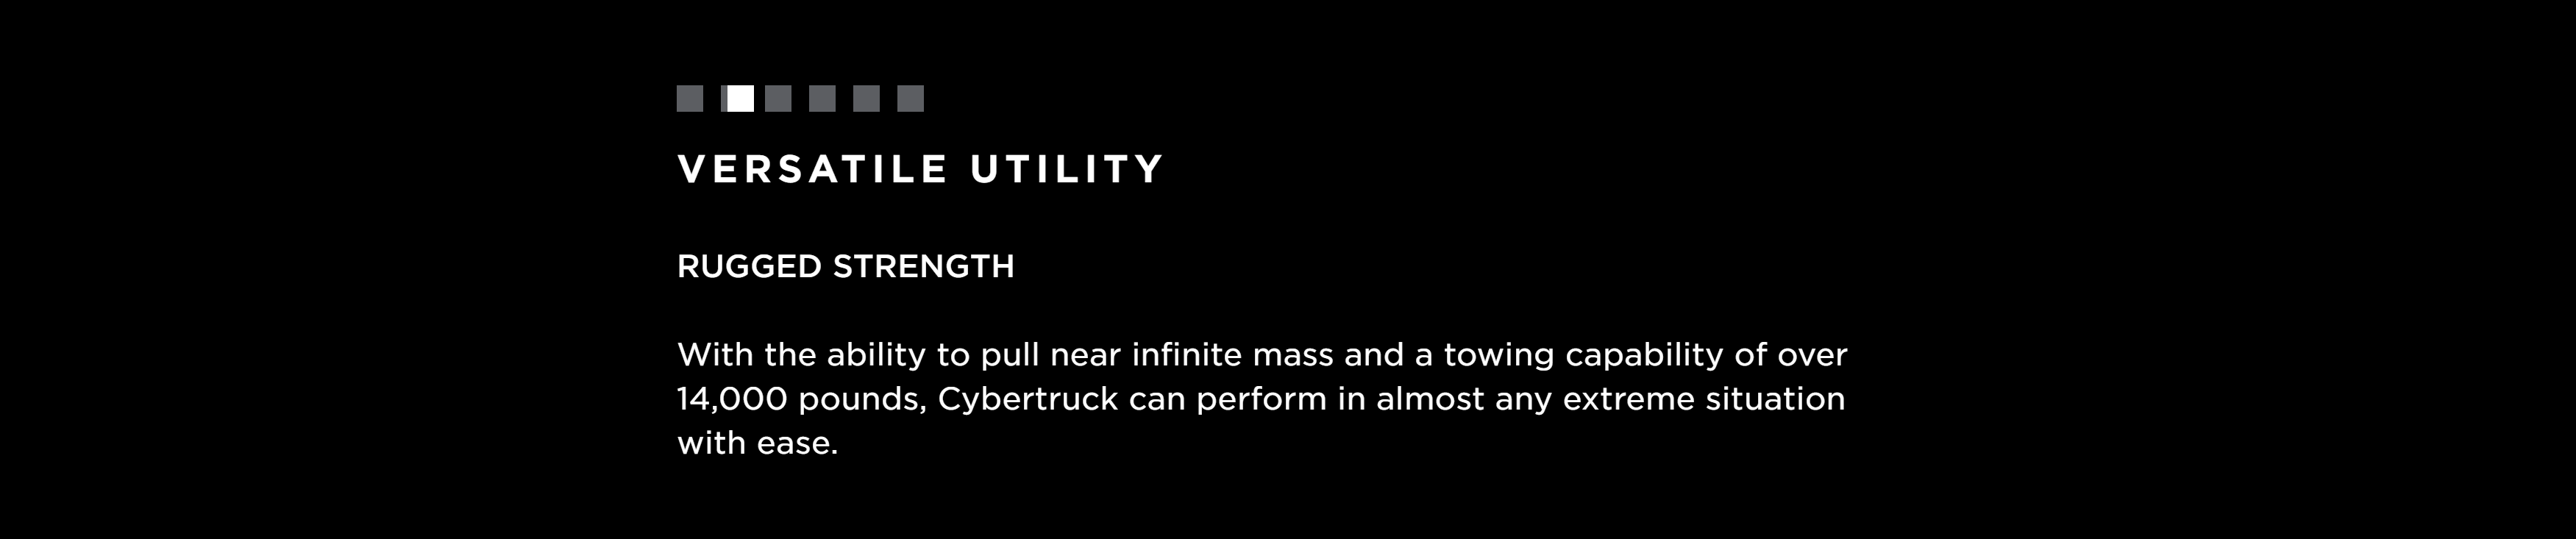 Tesla Claimed Cybertruck Could Pull “Near Infinite Mass” — What Does That Even Mean?